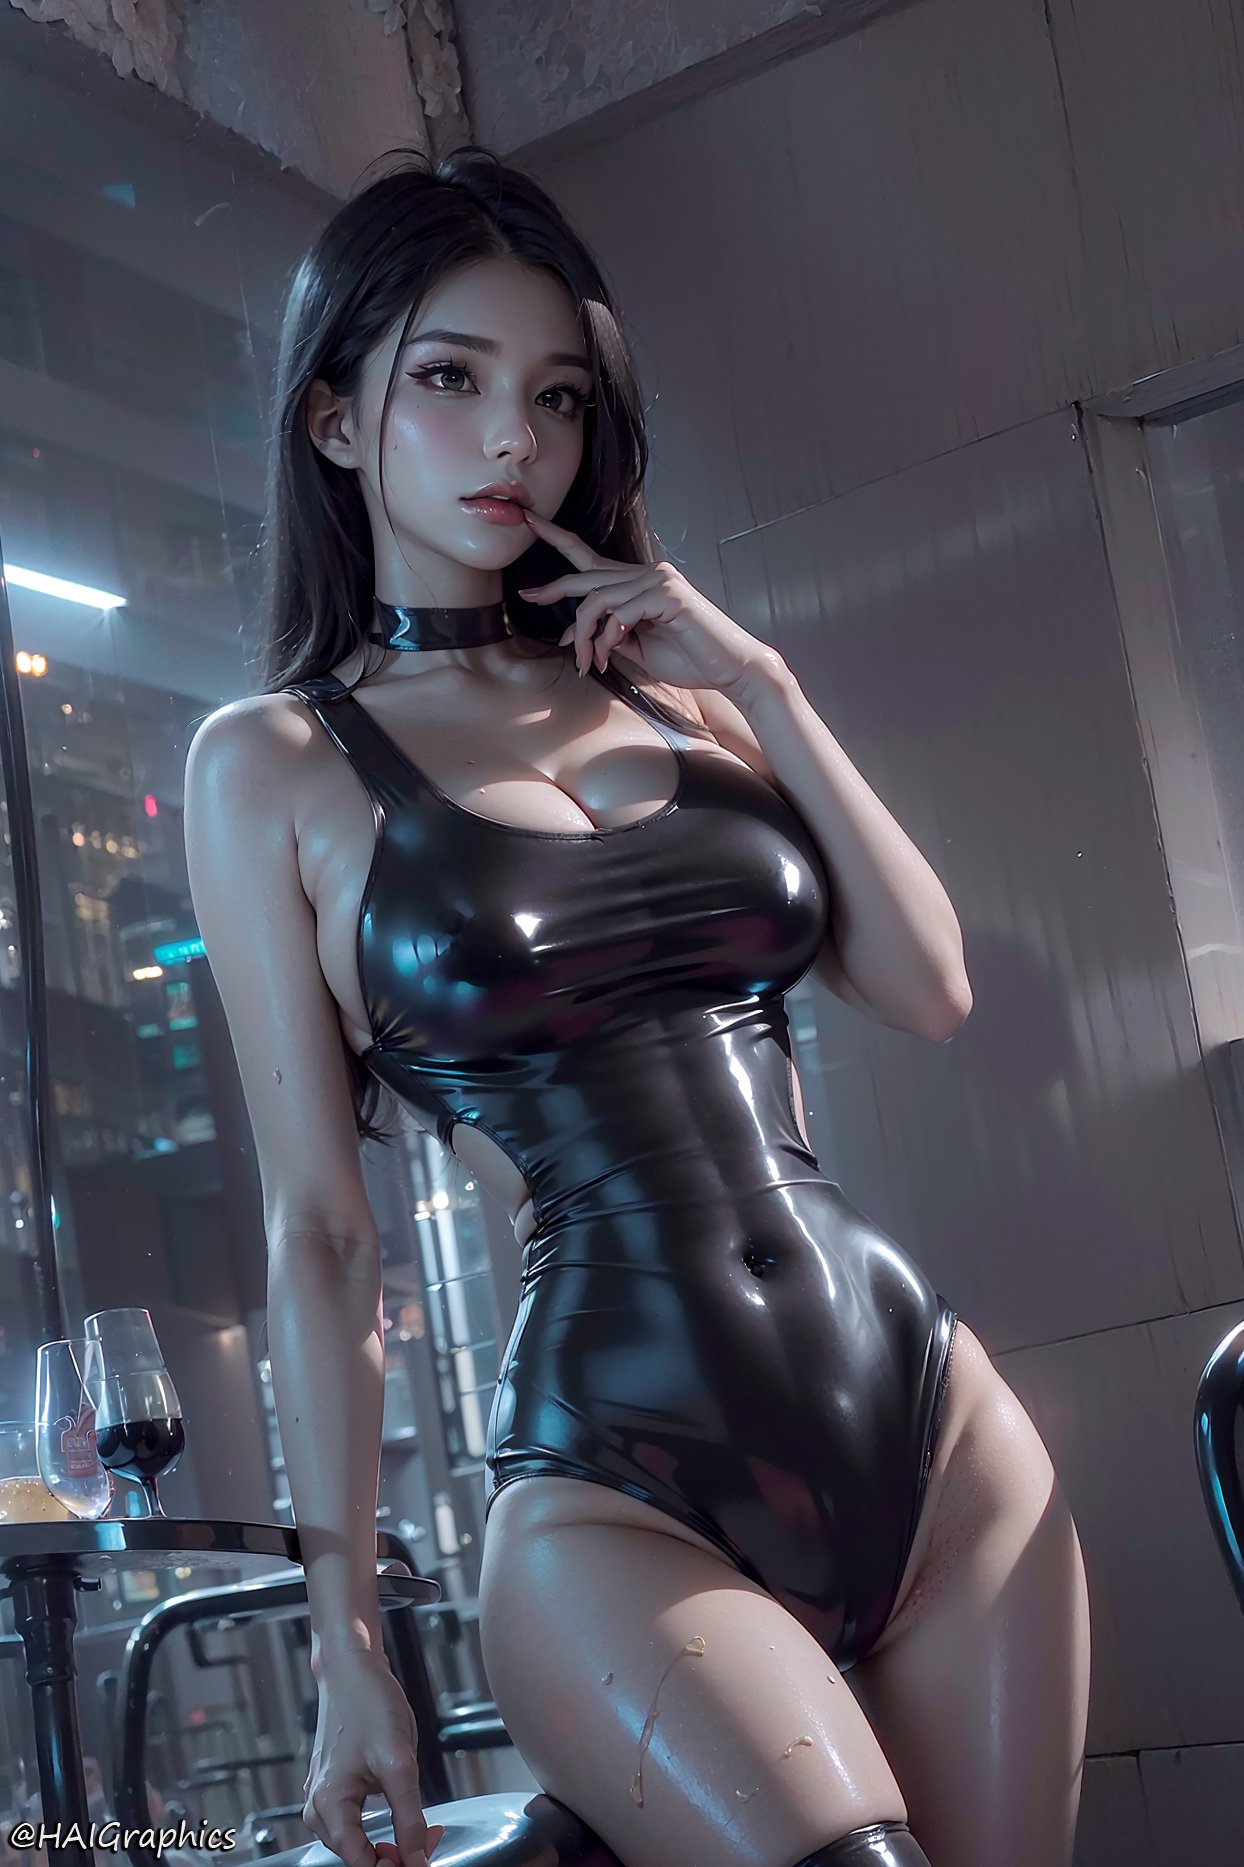 General 1244x1867 AI art Stable Diffusion women Asian portrait display big boobs thighs long hair choker swimwear one-piece swimsuit looking at viewer HAIGraphics